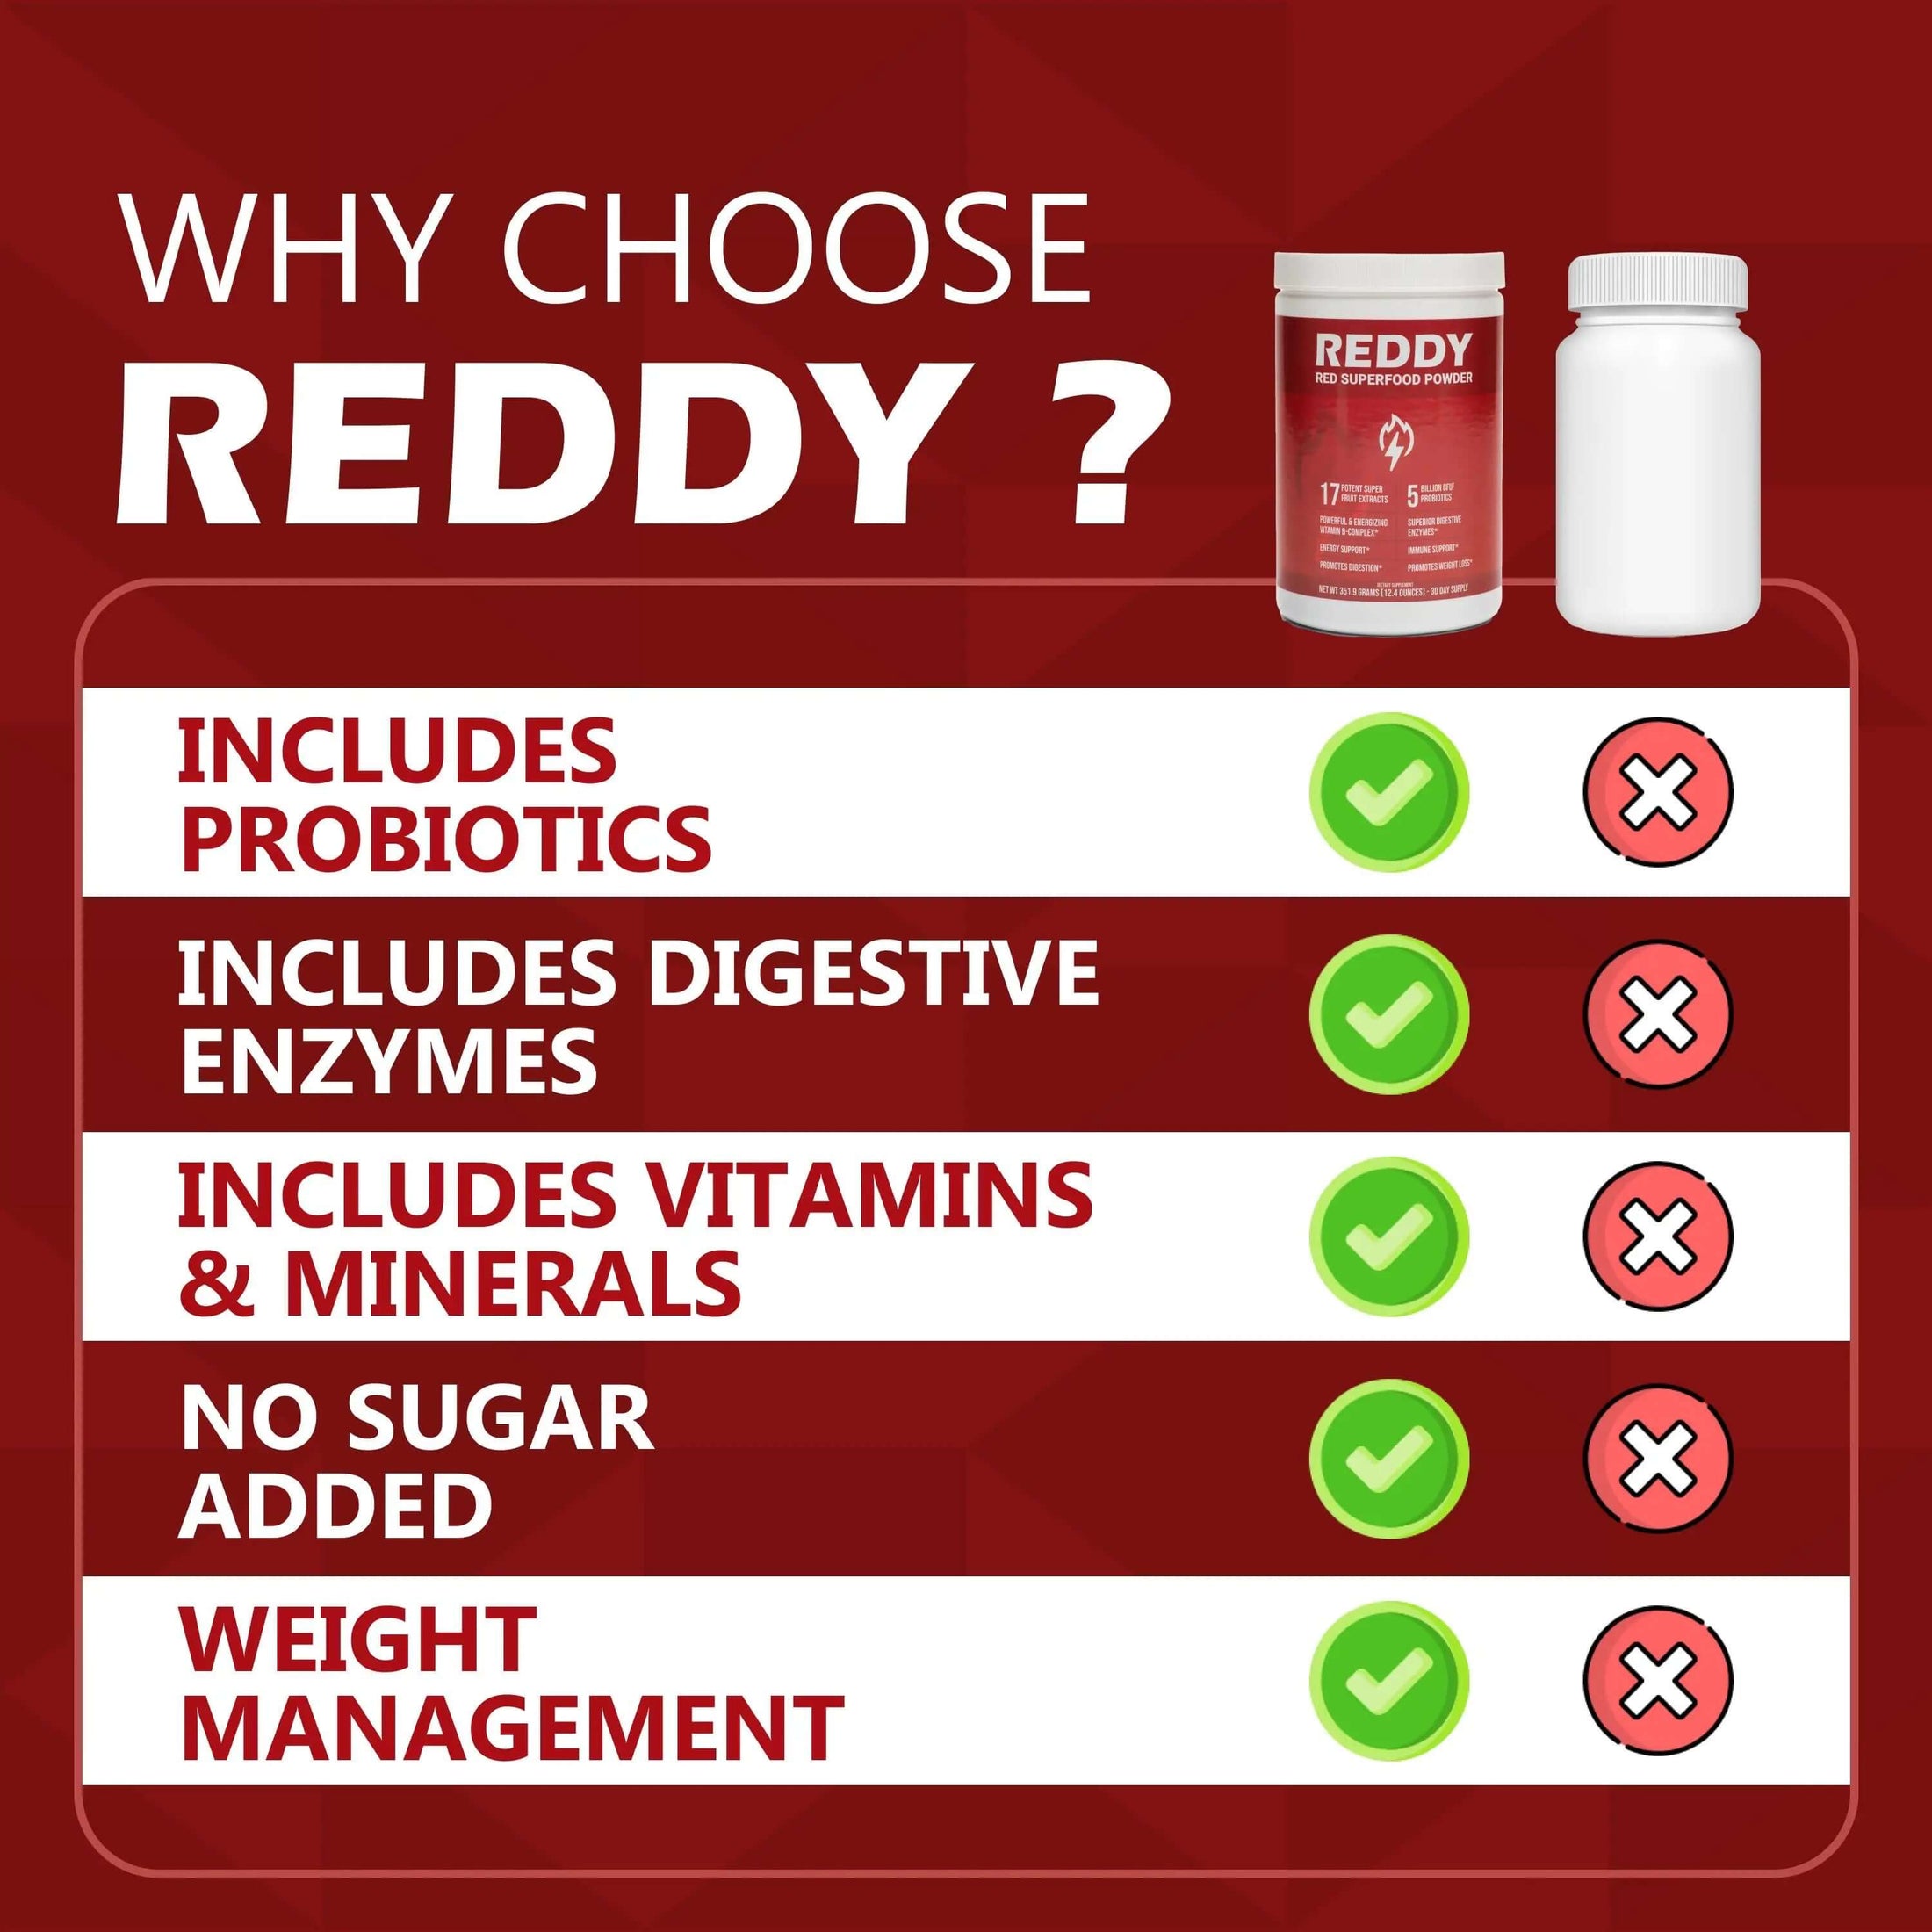 Reddy Red Organic Superfood Powder displayed next to other superfood products, highlighting its unique packaging and ingredient transparency.